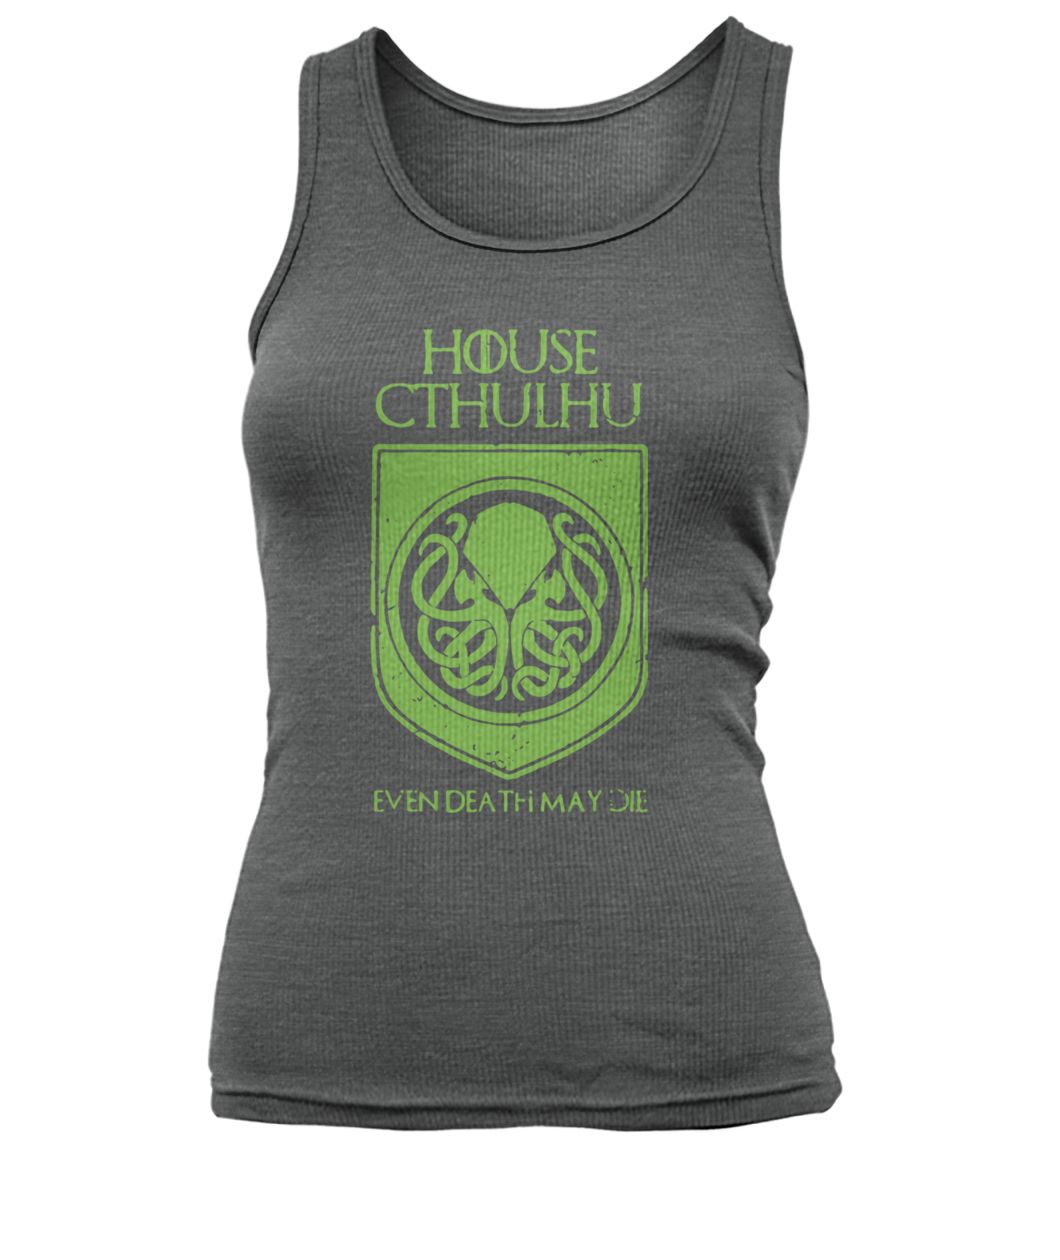 Game of thrones house cthulhu even death may die women's tank top